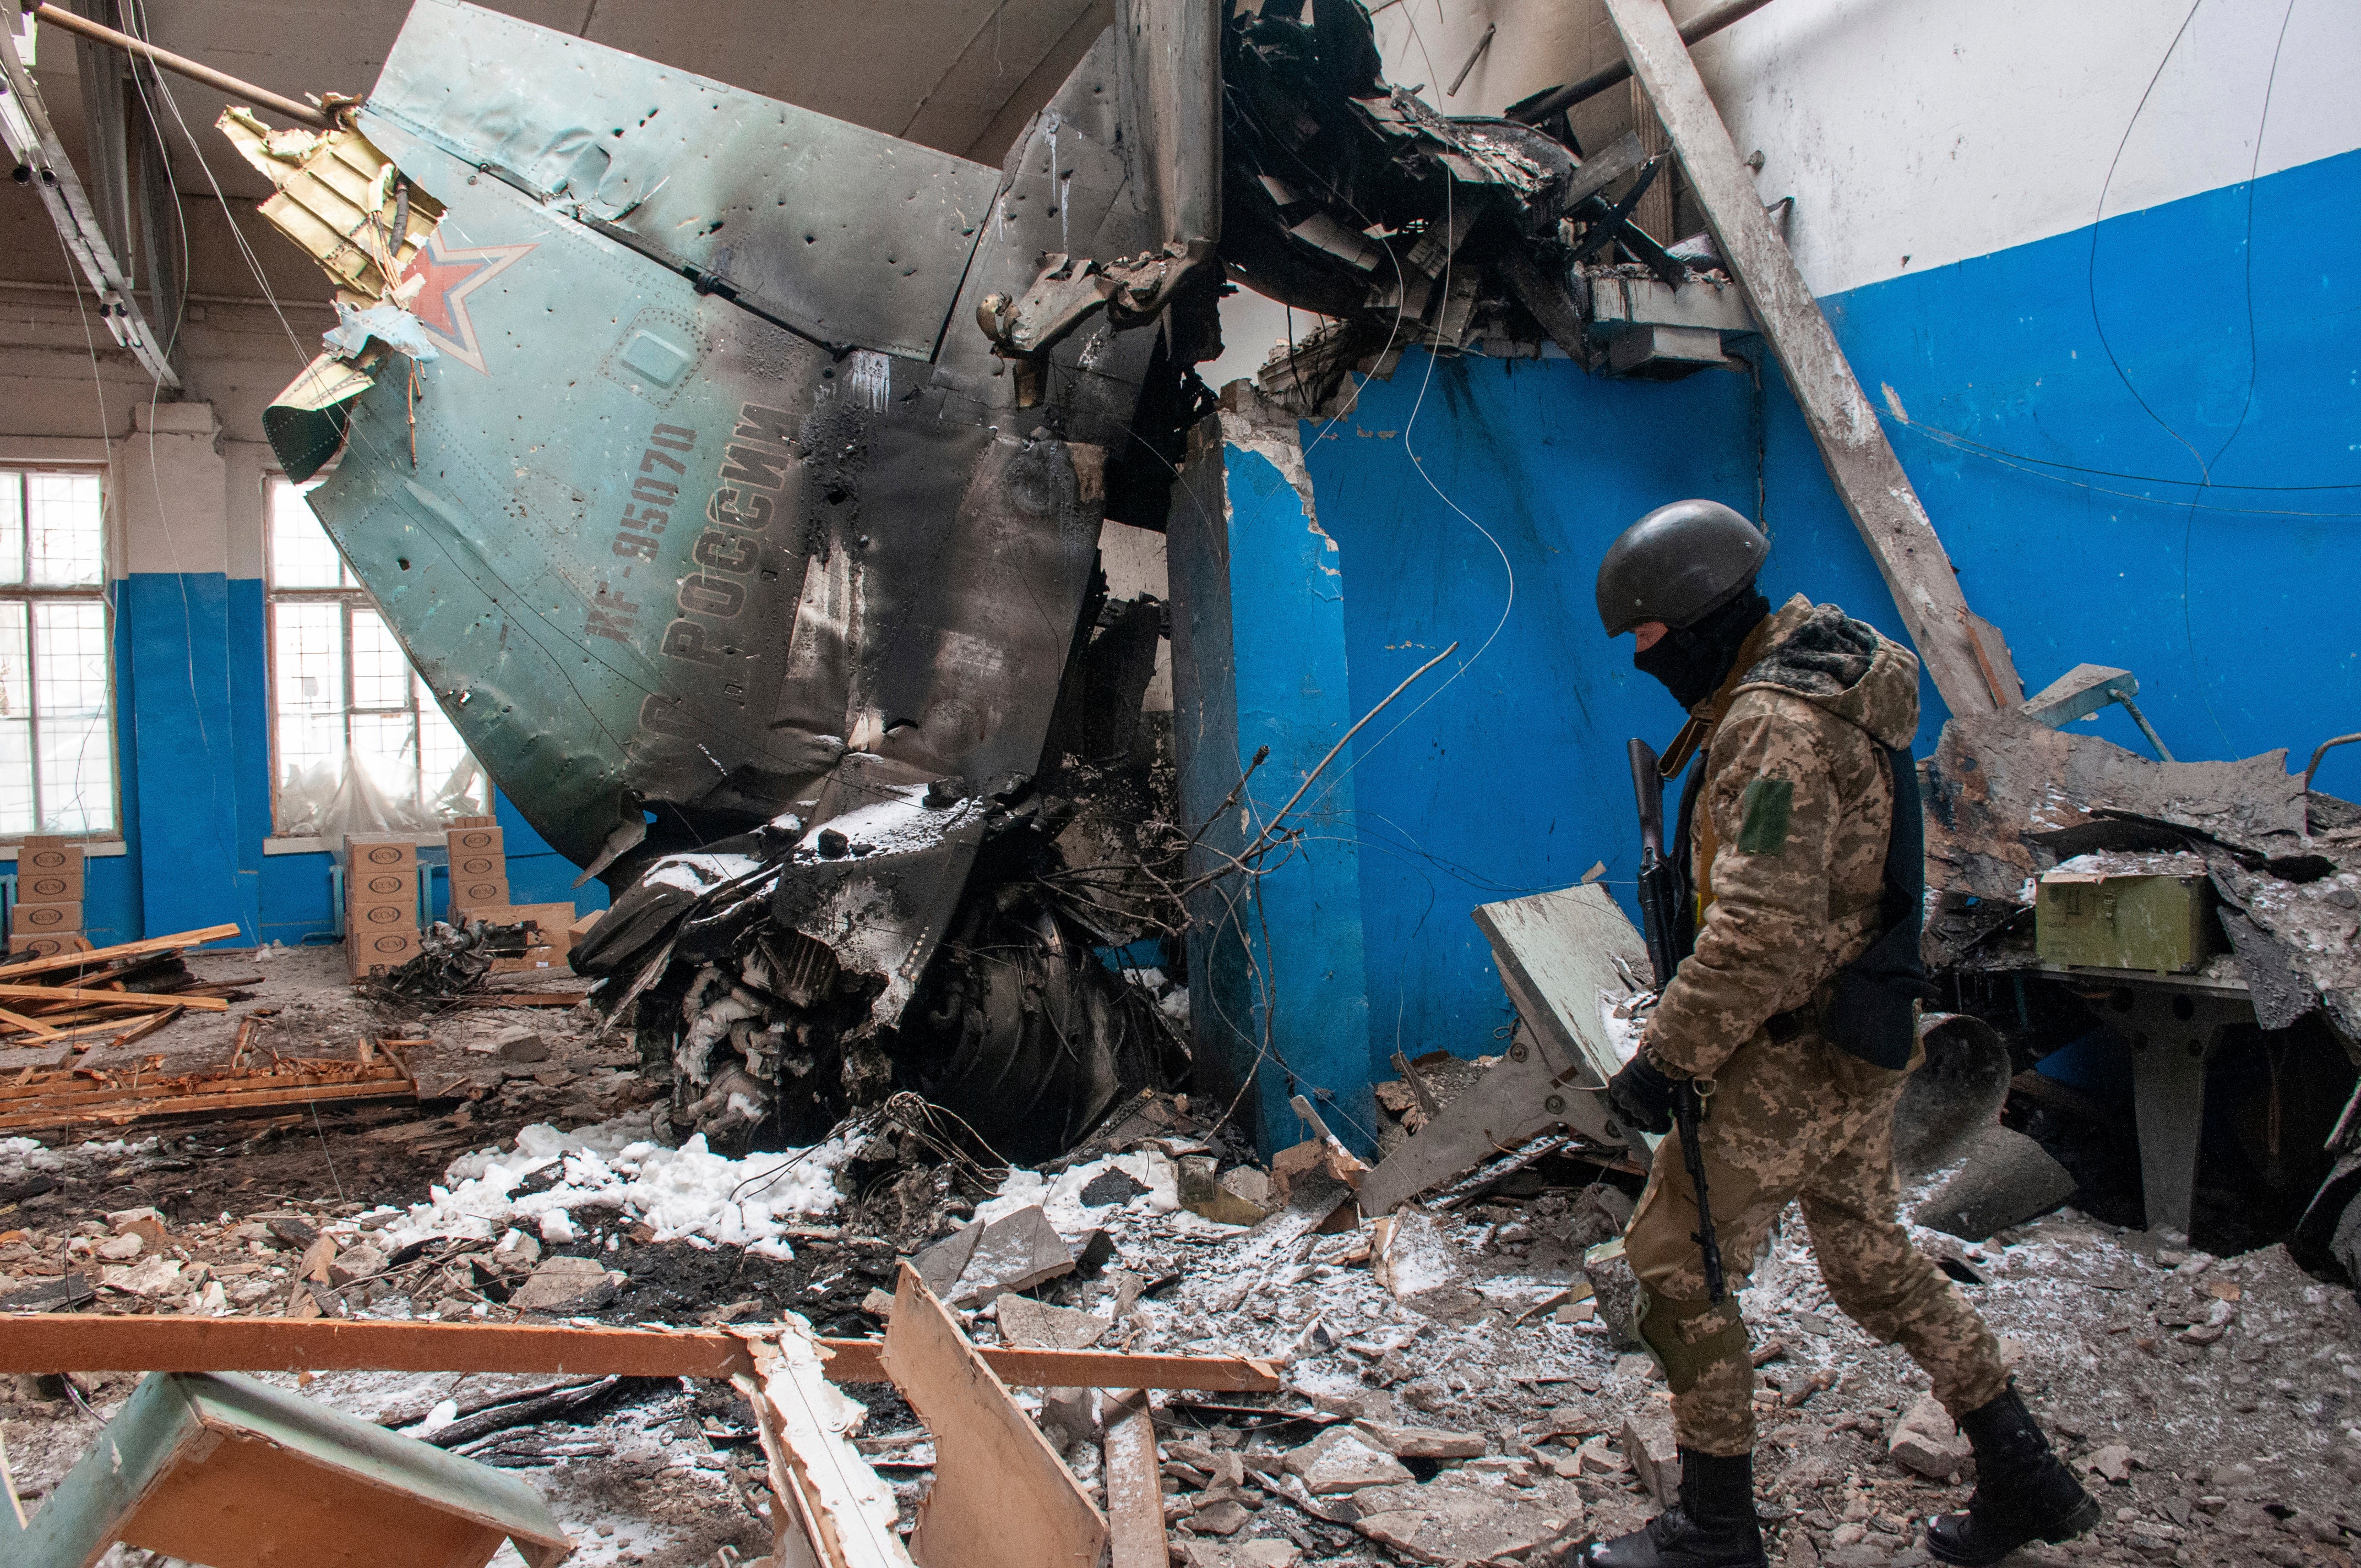 A Ukrainian serviceman walks past the vertical tail fin of a Russian Su-34 bomber lying in a damaged building in Kharkiv.